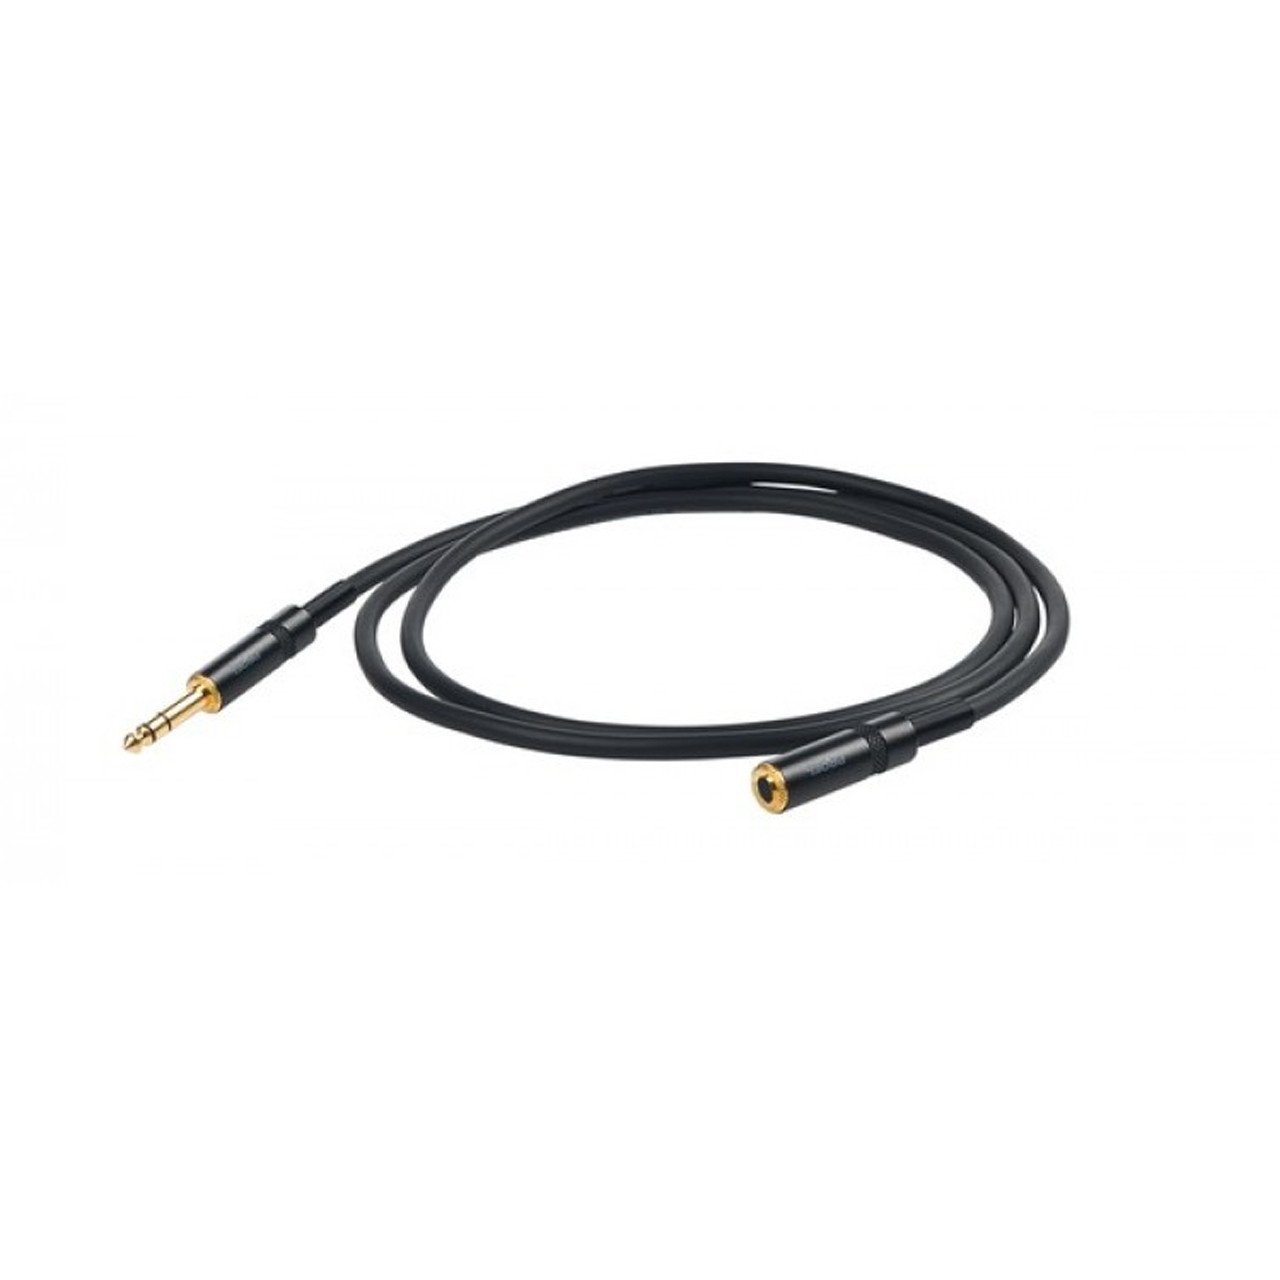 Cables & Adapters - Proel CHLP190LU3 3m Headphone Extension Cable